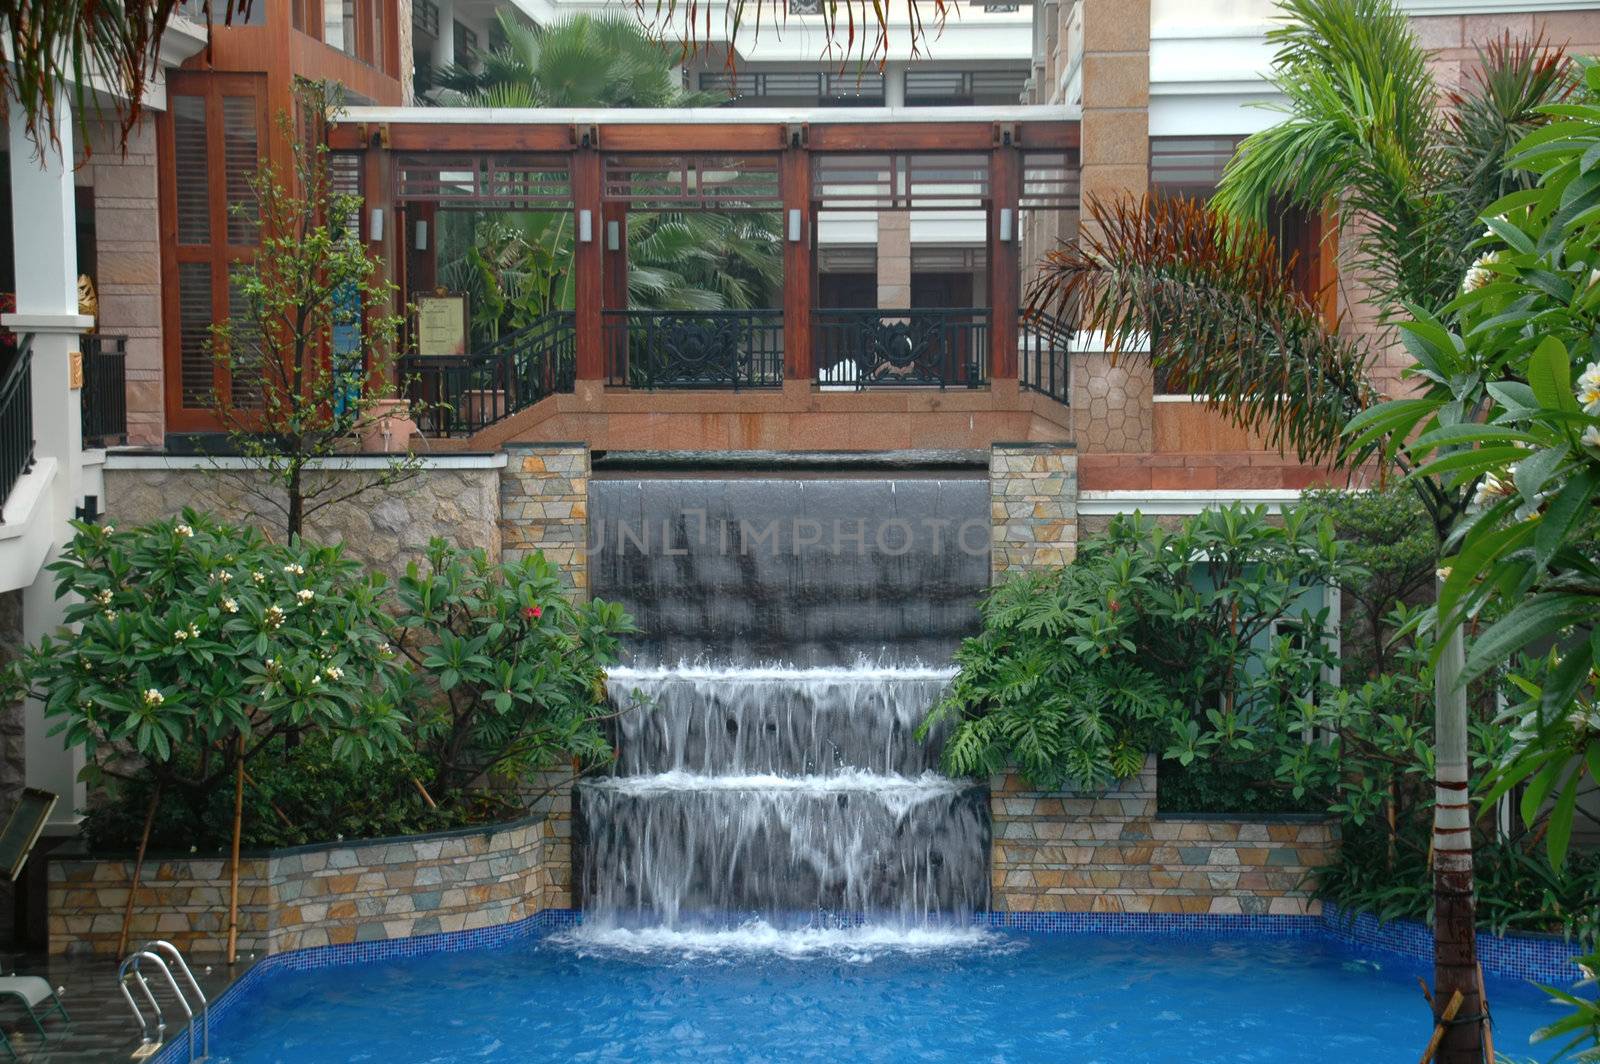 The swimming pool and waterfall in hotel (resort)